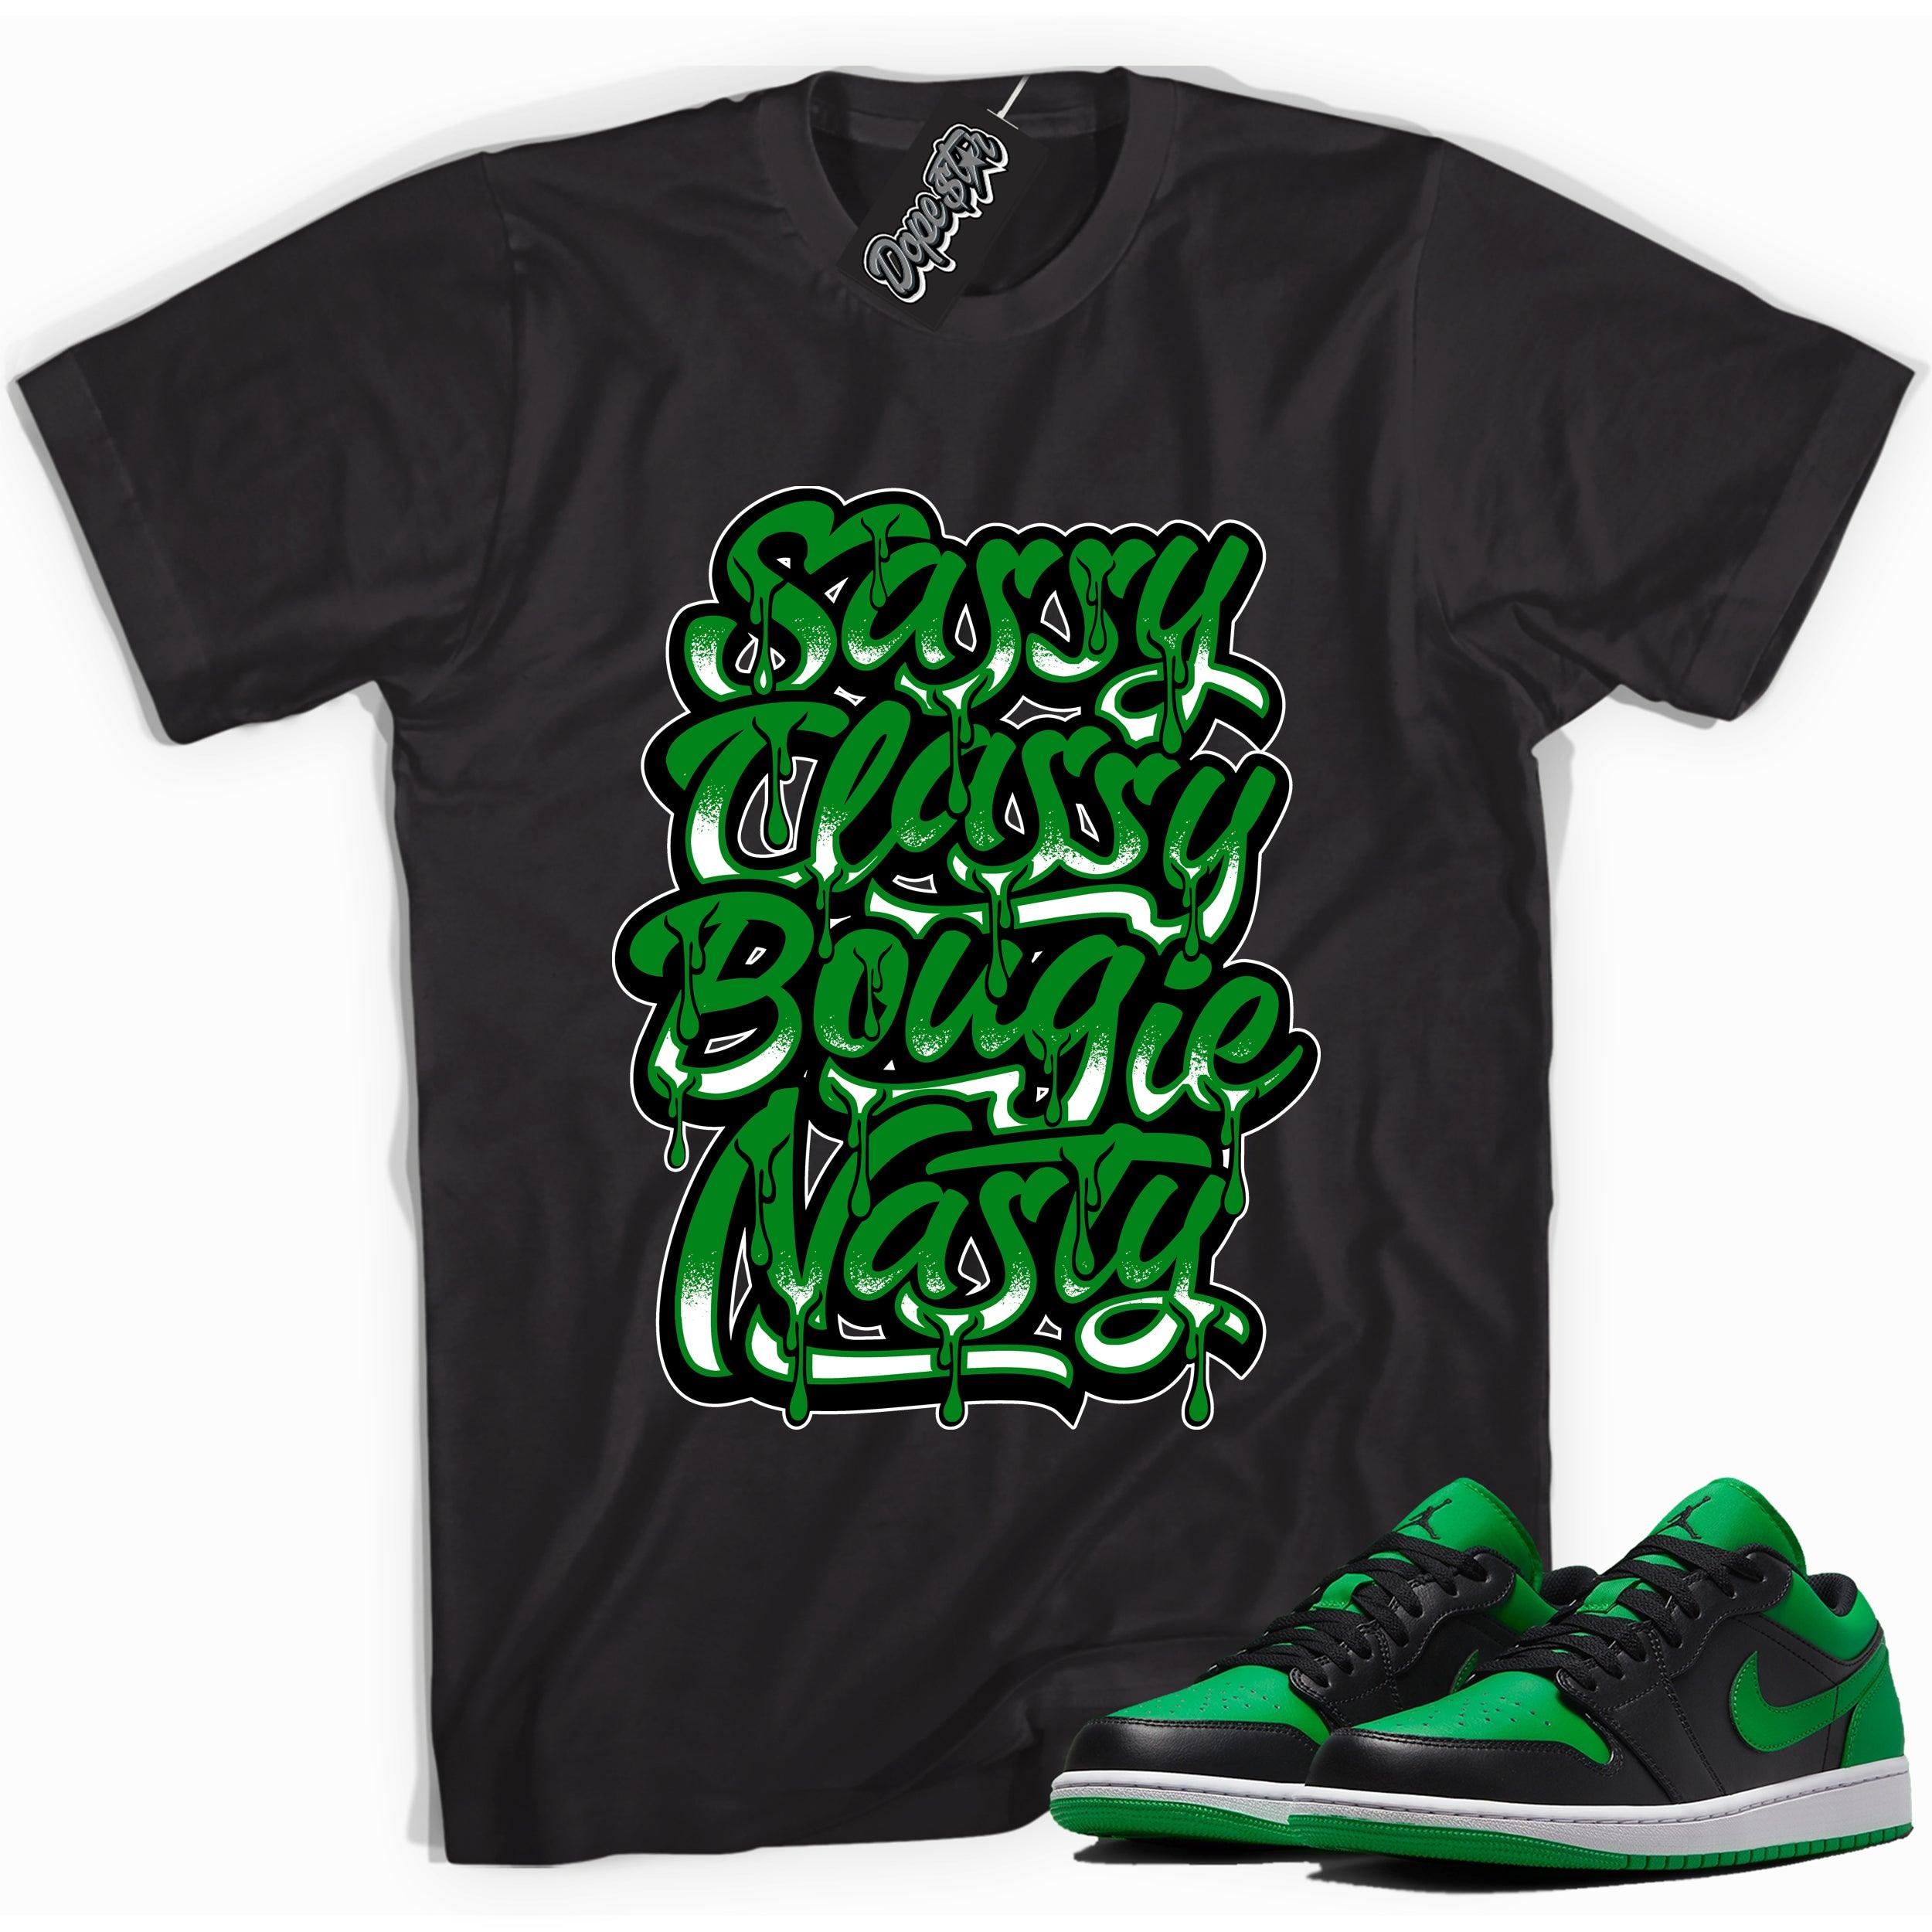 Cool black graphic tee with 'sassy classy' print, that perfectly matches Air Jordan 1 Low Lucky Green sneakers